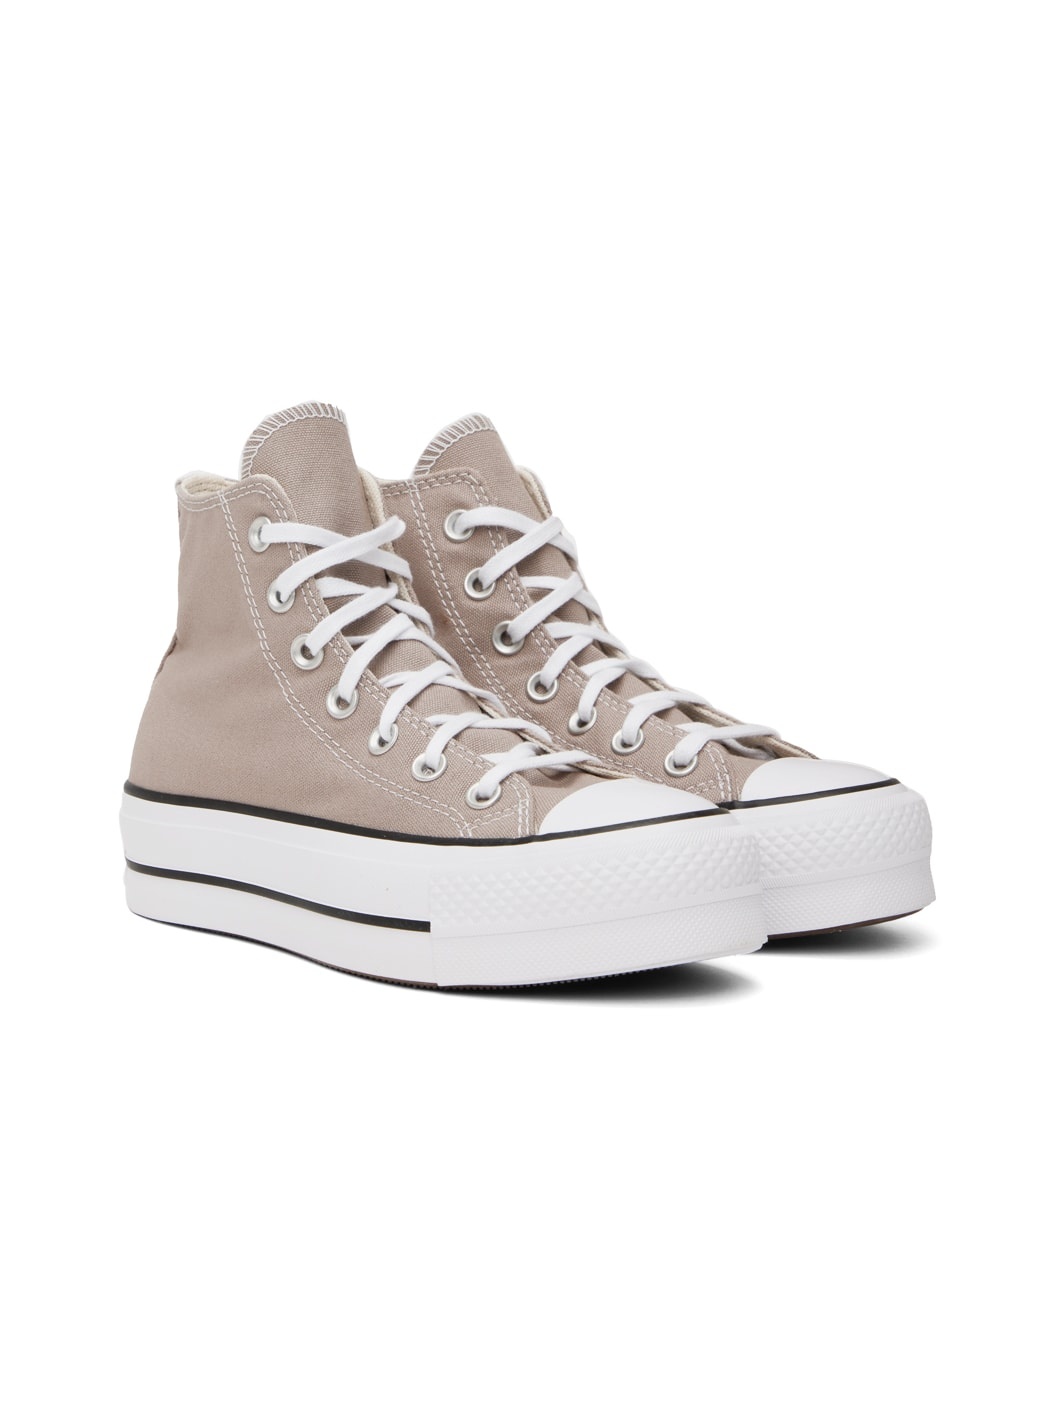 Taupe Chuck Taylor All Star Lift Platform High Top Sneakers by Converse on  Sale